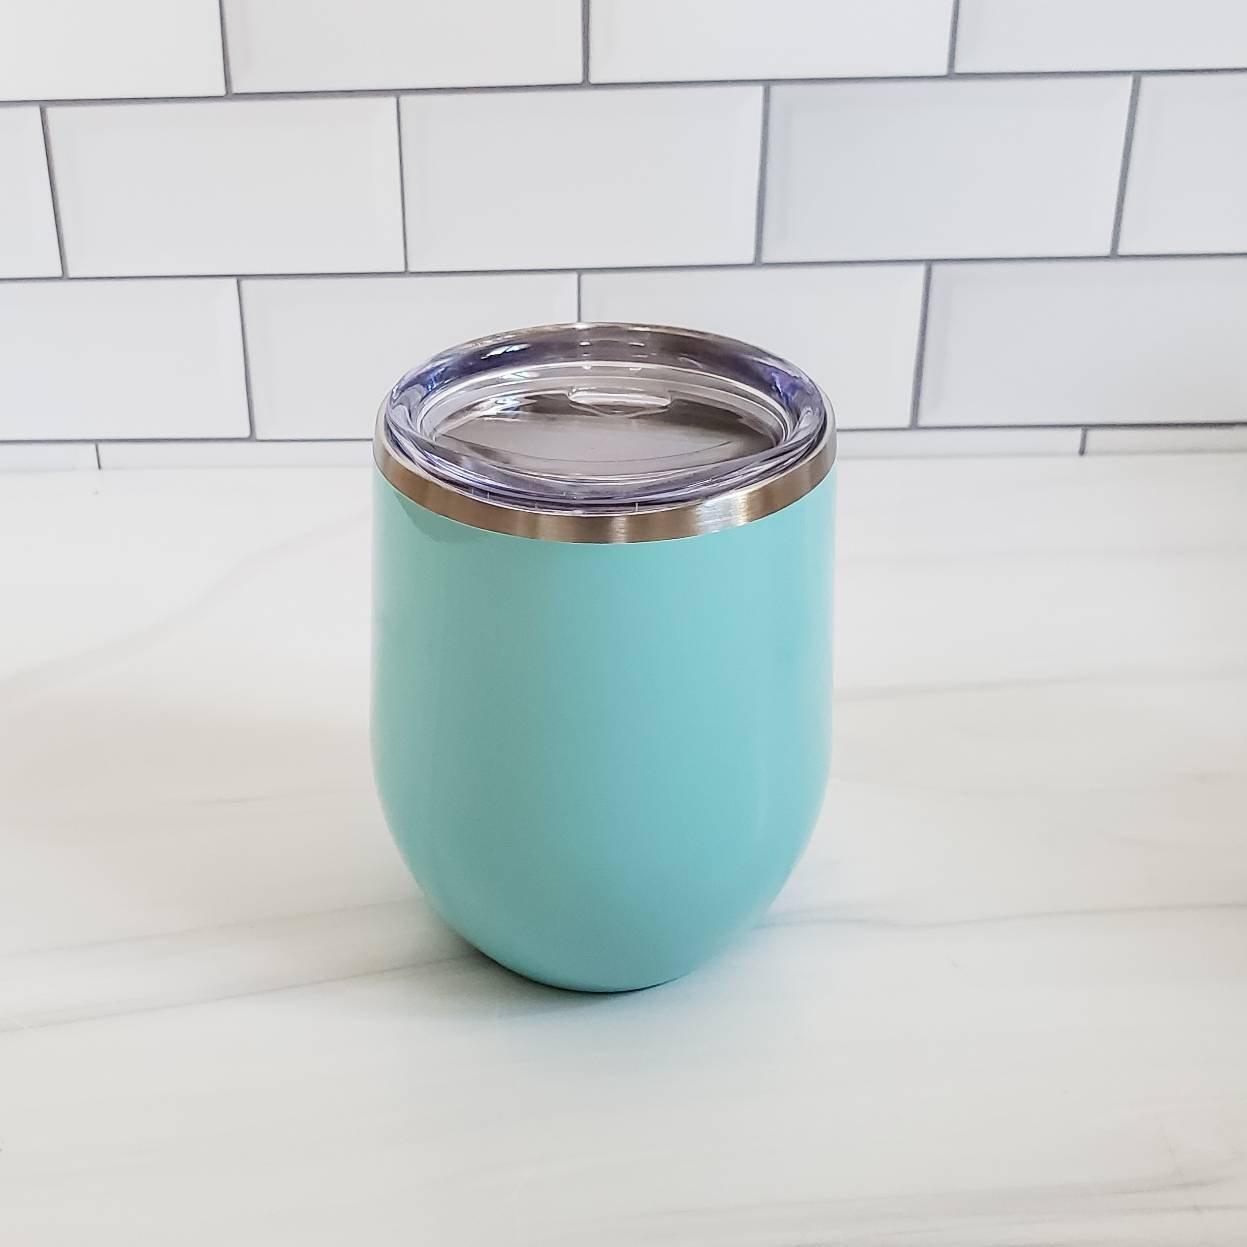 You Had Me At Day Drinking Wine Tumbler Salt and Sparkle